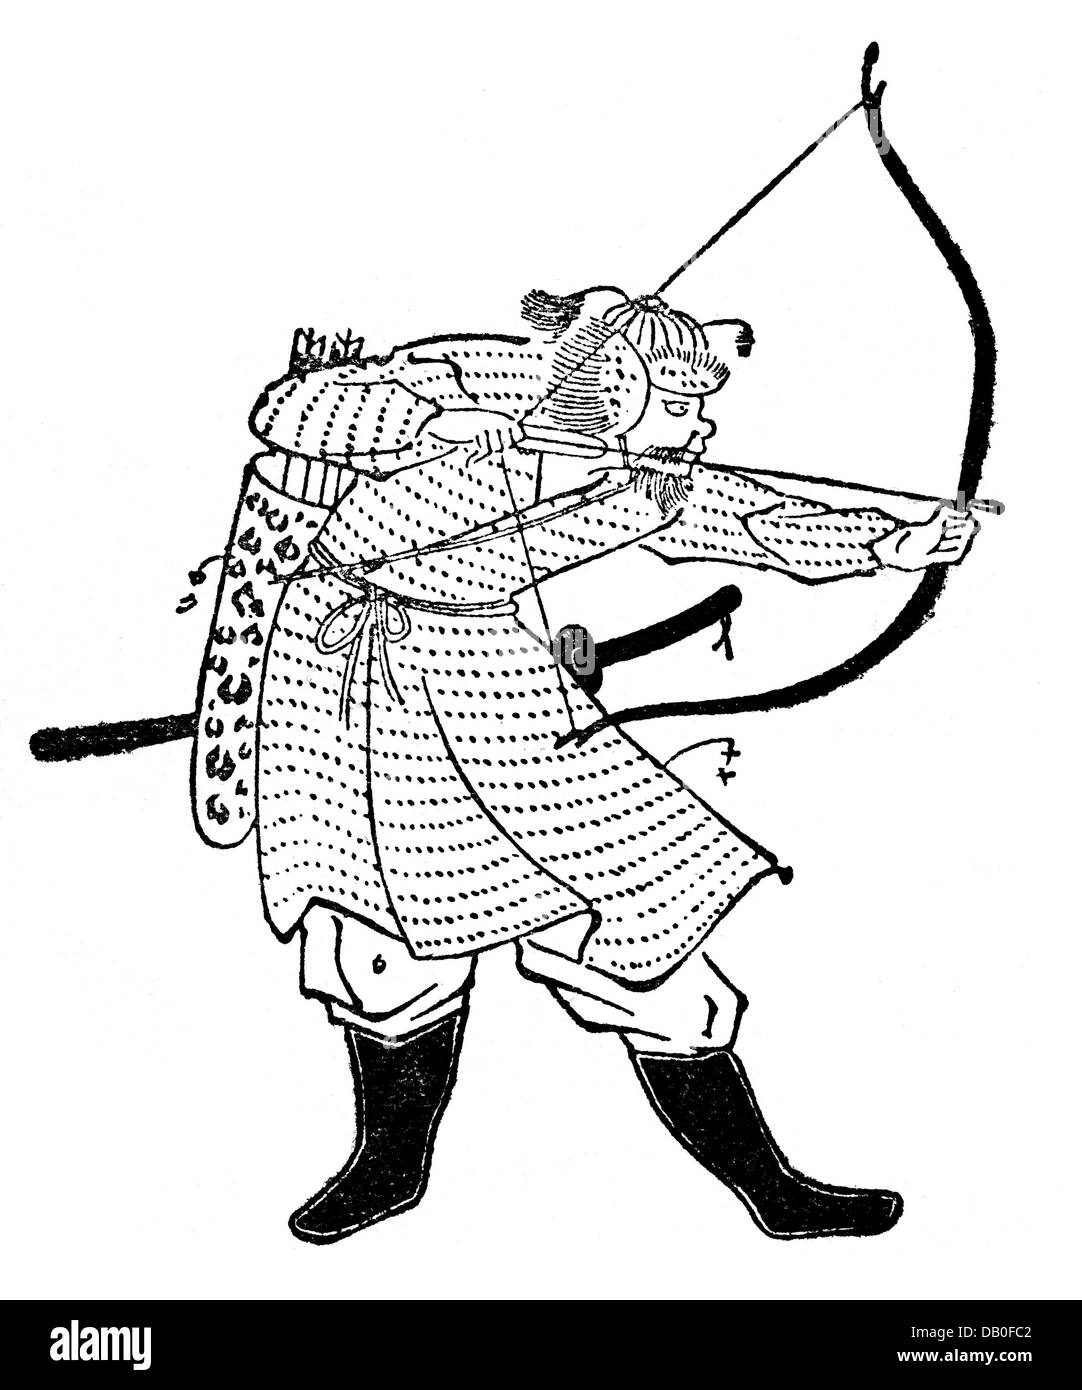 Mongol Invasions in Japan 1274 - 1281, Mongolian archer, drawing, after 'Moko Shurai Ekotoba',between 1275 and 1293, Additional-Rights-Clearences-Not Available Stock Photo